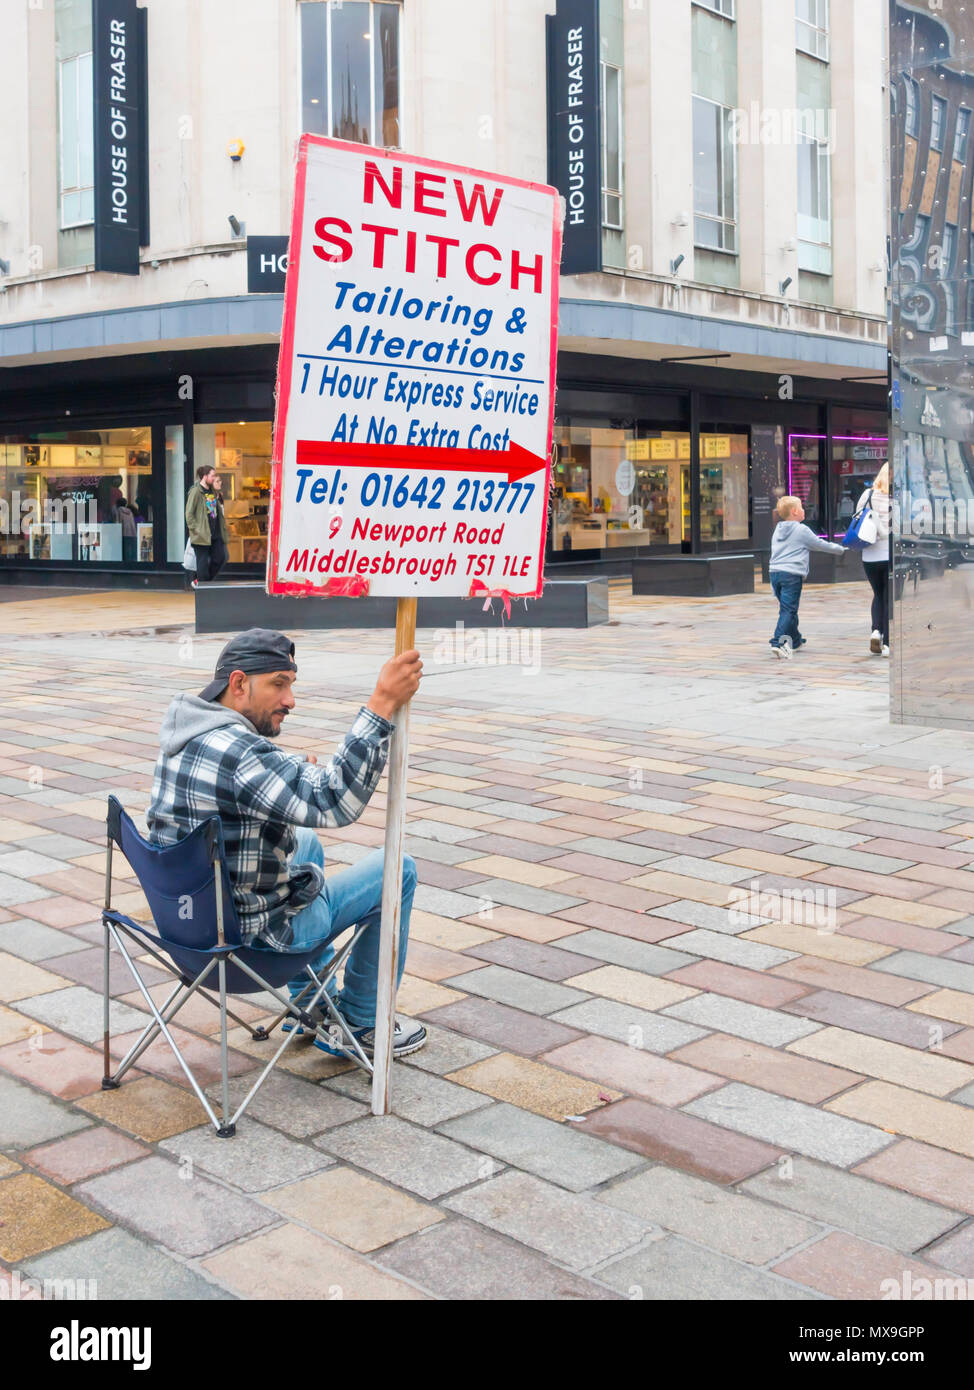 East Asian man seated at a pedestrianised junction in Middlesbrough Town Centre holding an advertising placard for New Stitch a Turkish Tailor shop Stock Photo